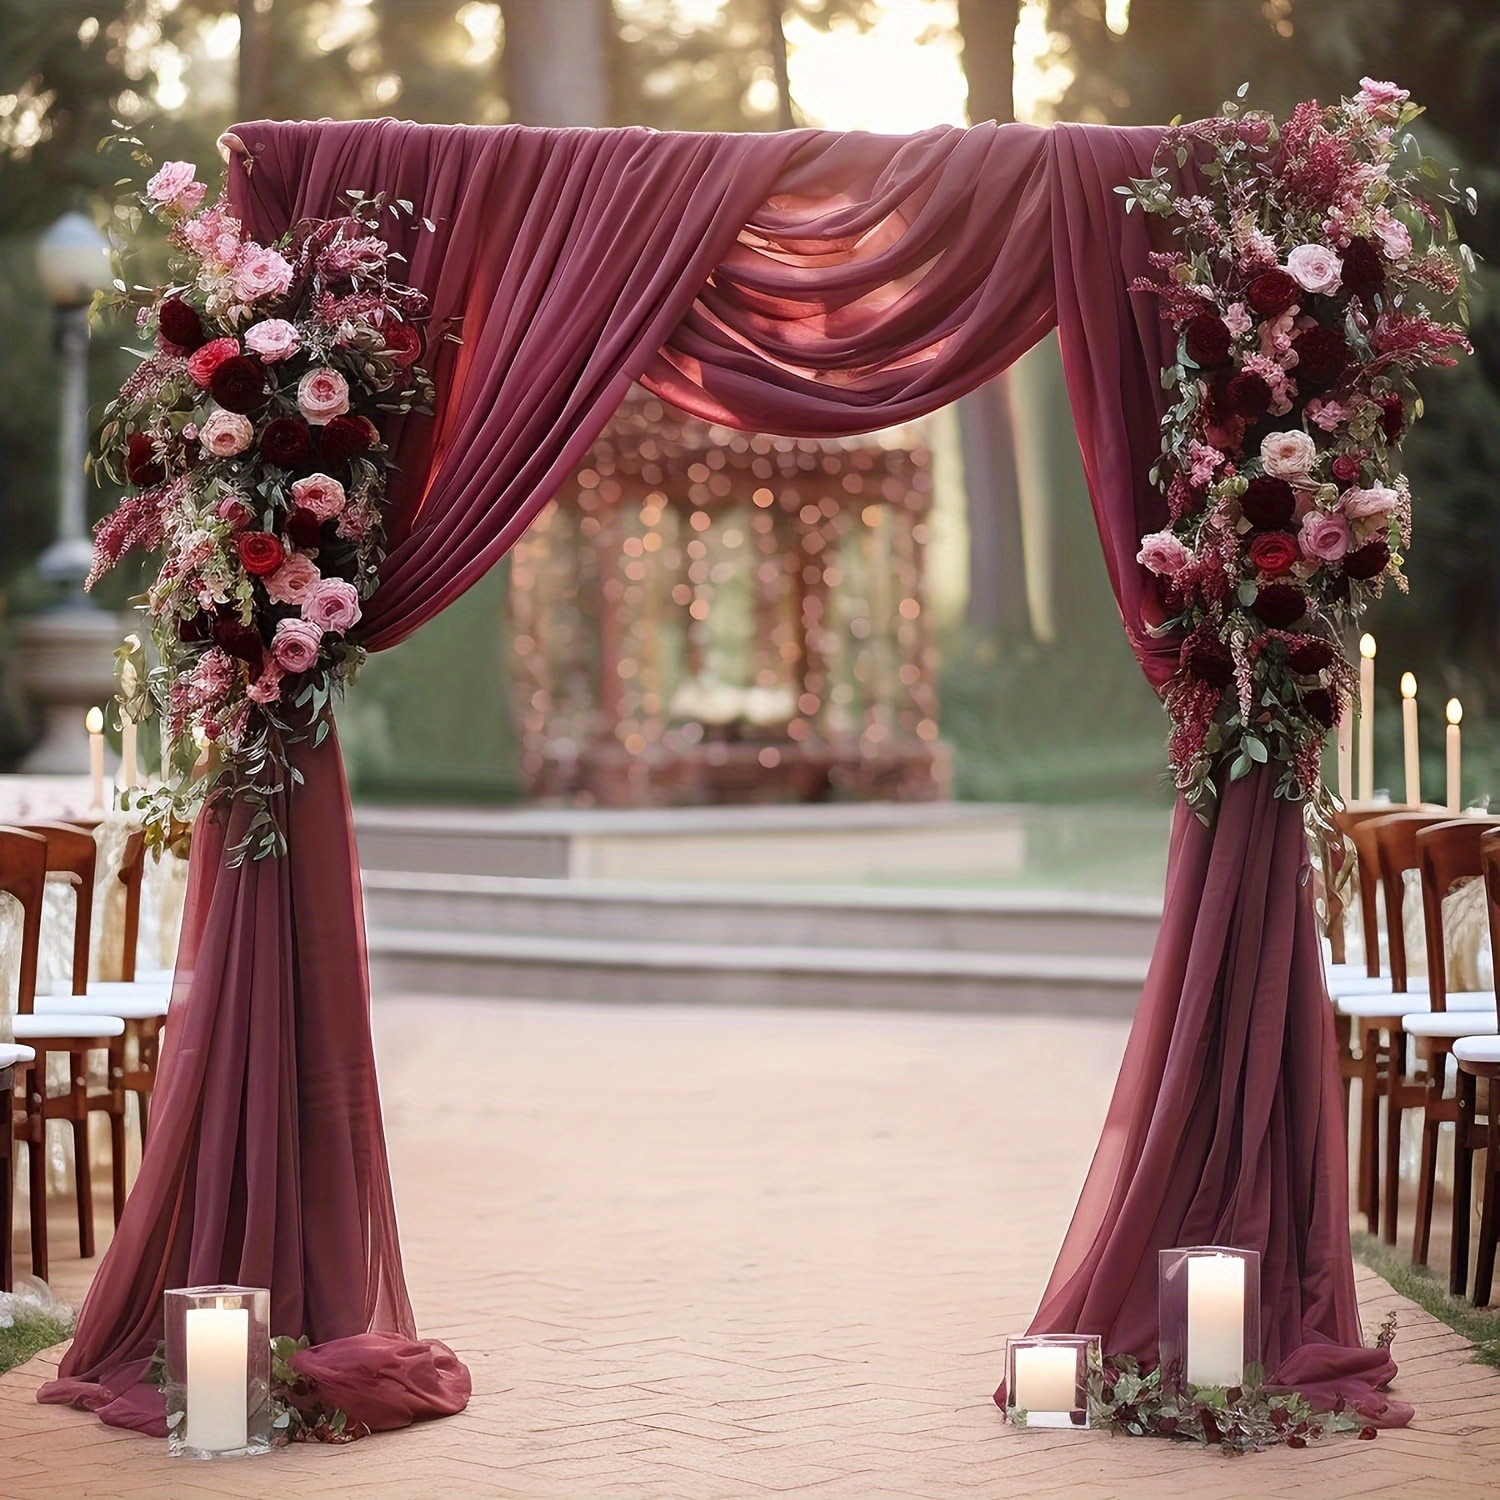 

Elegant Solid Burgundy Polyester Table Runner For Christmas - Woven Rectangle Shimmer Fabric For Wedding Arch, Ceremony Backdrop, And Party Decorations - Durable And Versatile Polyester Cover Material